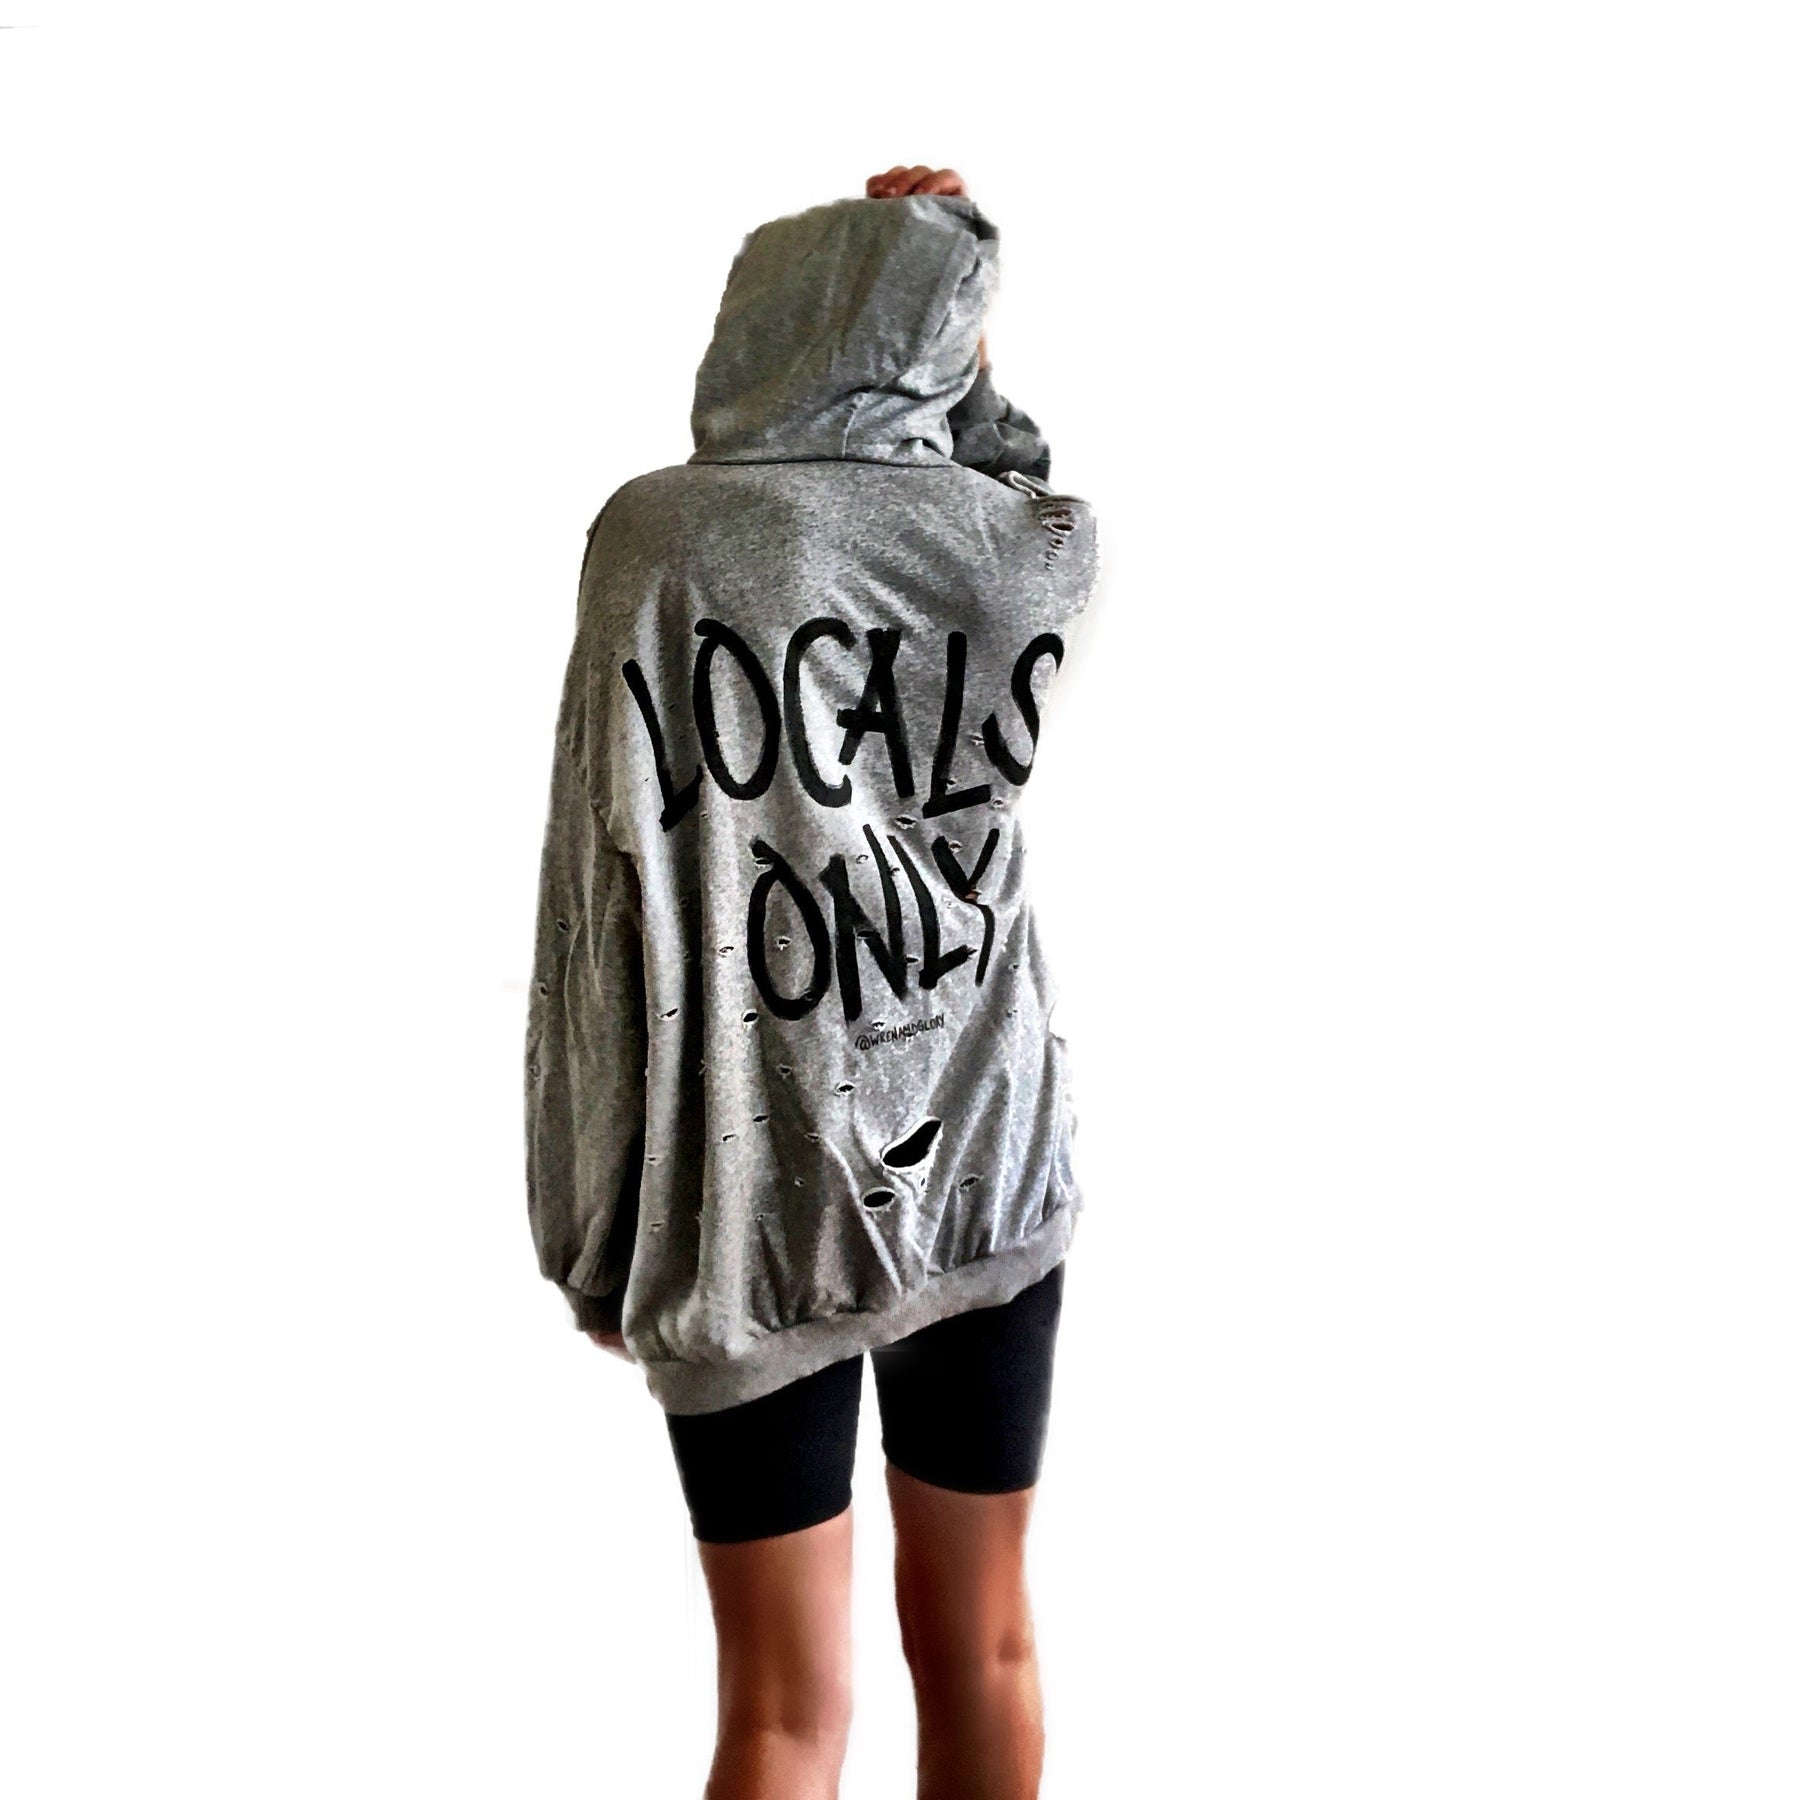 The perfect oversized, gray, distressed hoodie. LOCALS ONLY painted in back in with NYC 2019 in small along edge of hood. Signed @wrenandglory.